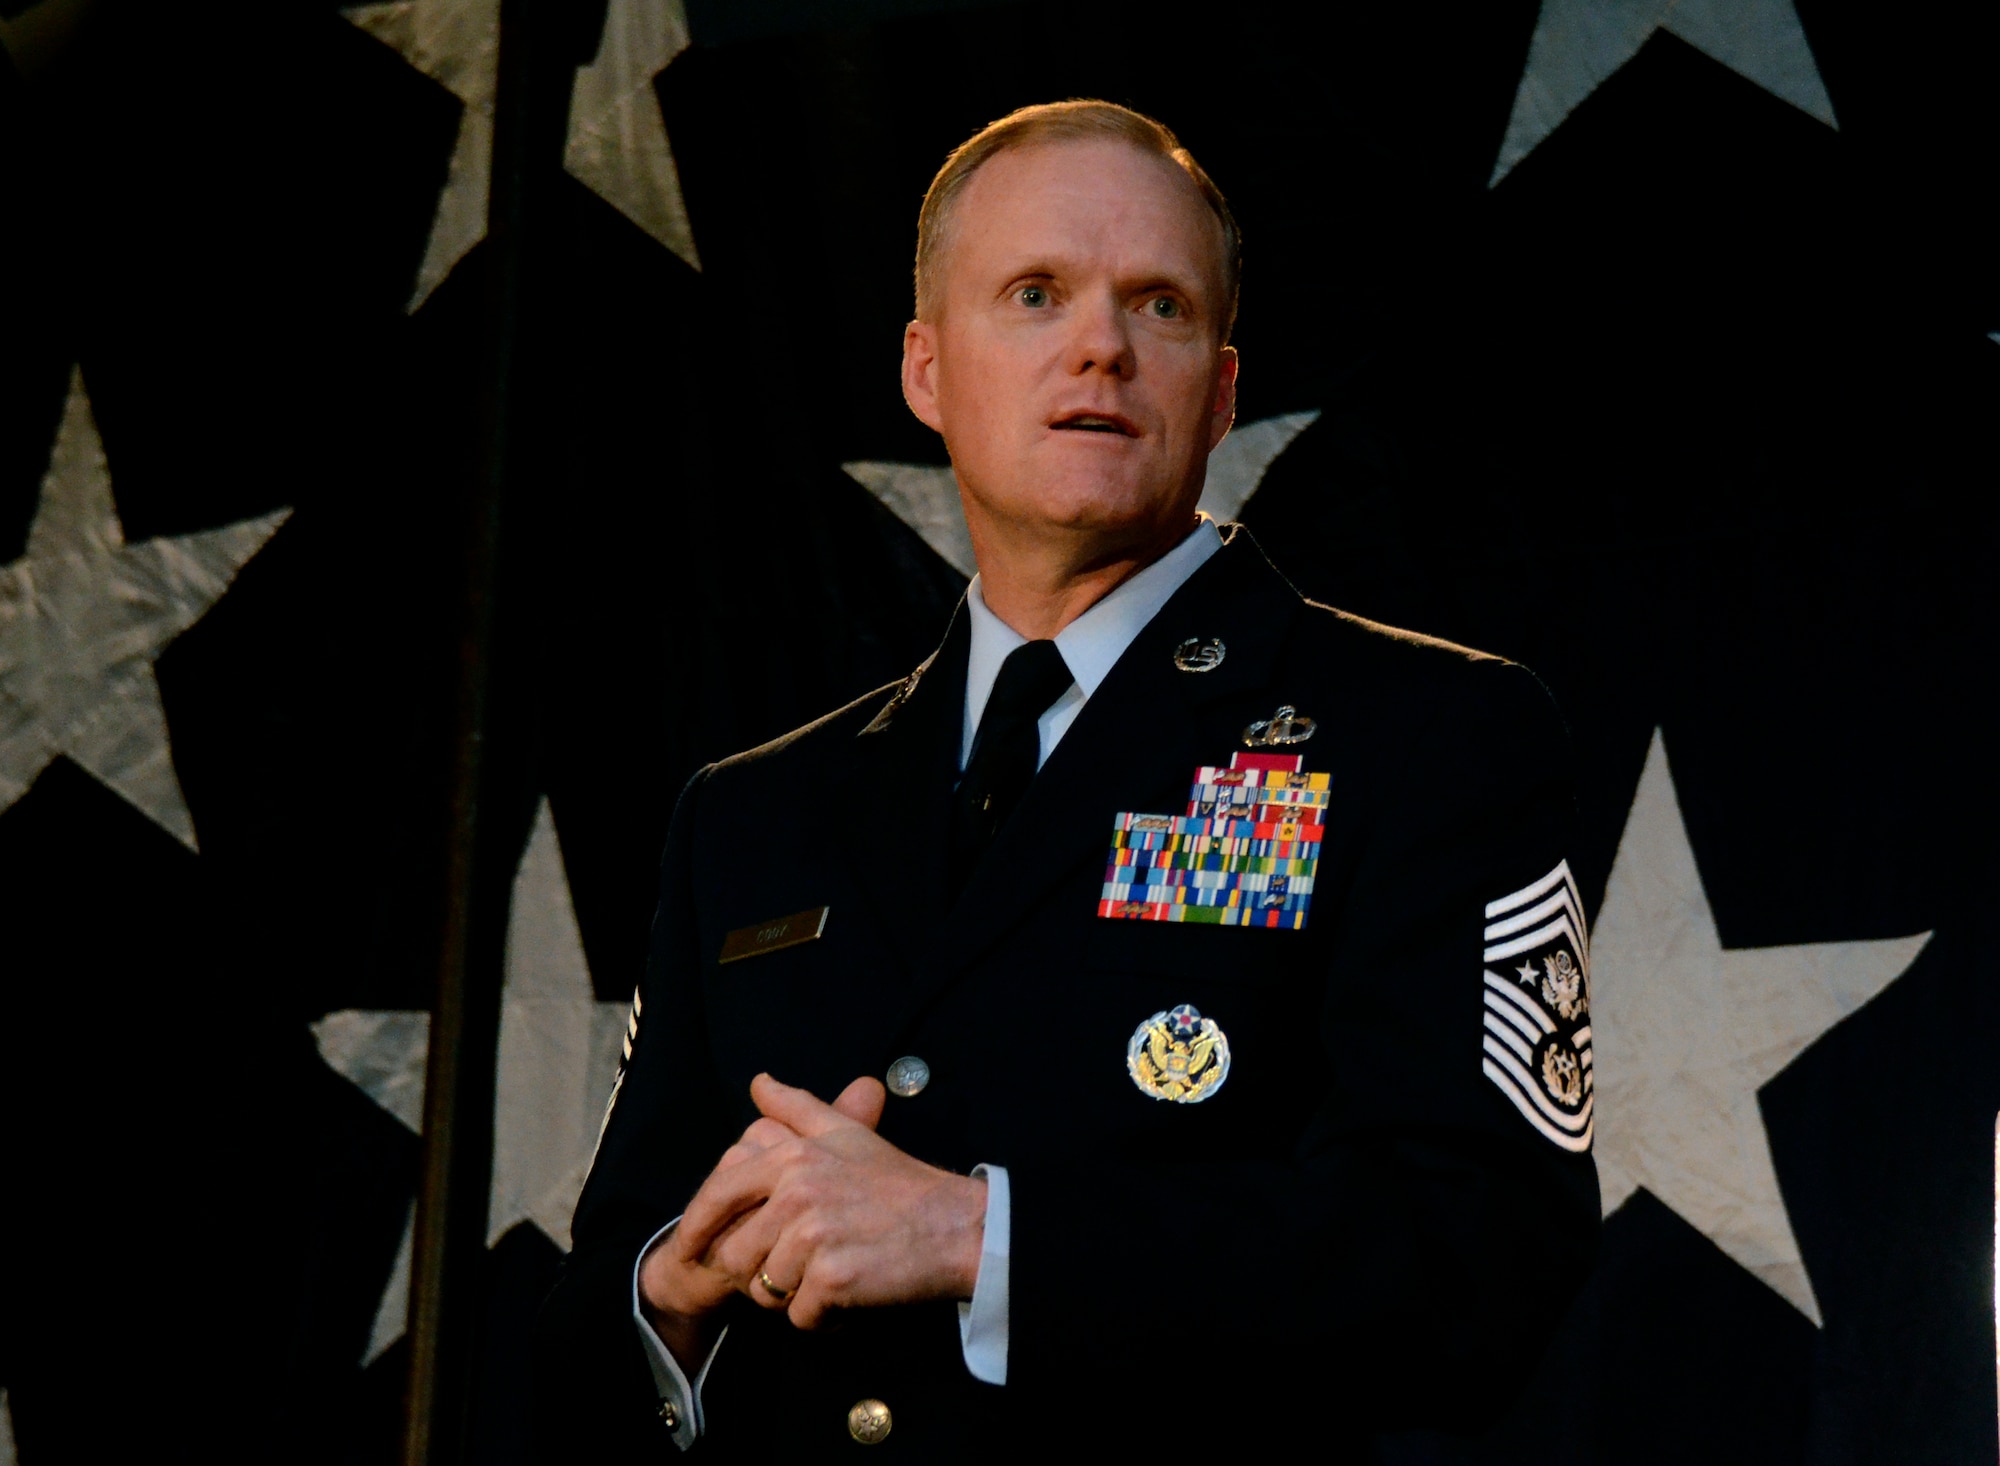 Chief Master Sergeant of the Air Force James A. Cody addresses over 700 community leaders and members of the Armed Forces based in Northwest Georgia during the Atlanta Regional Military Affairs Council’s 62nd Annual Military Appreciation Luncheon Nov. 17, 2014 at the Cobb Galleria Centre. (U.S. Air Force photo by Don Peek/Released)